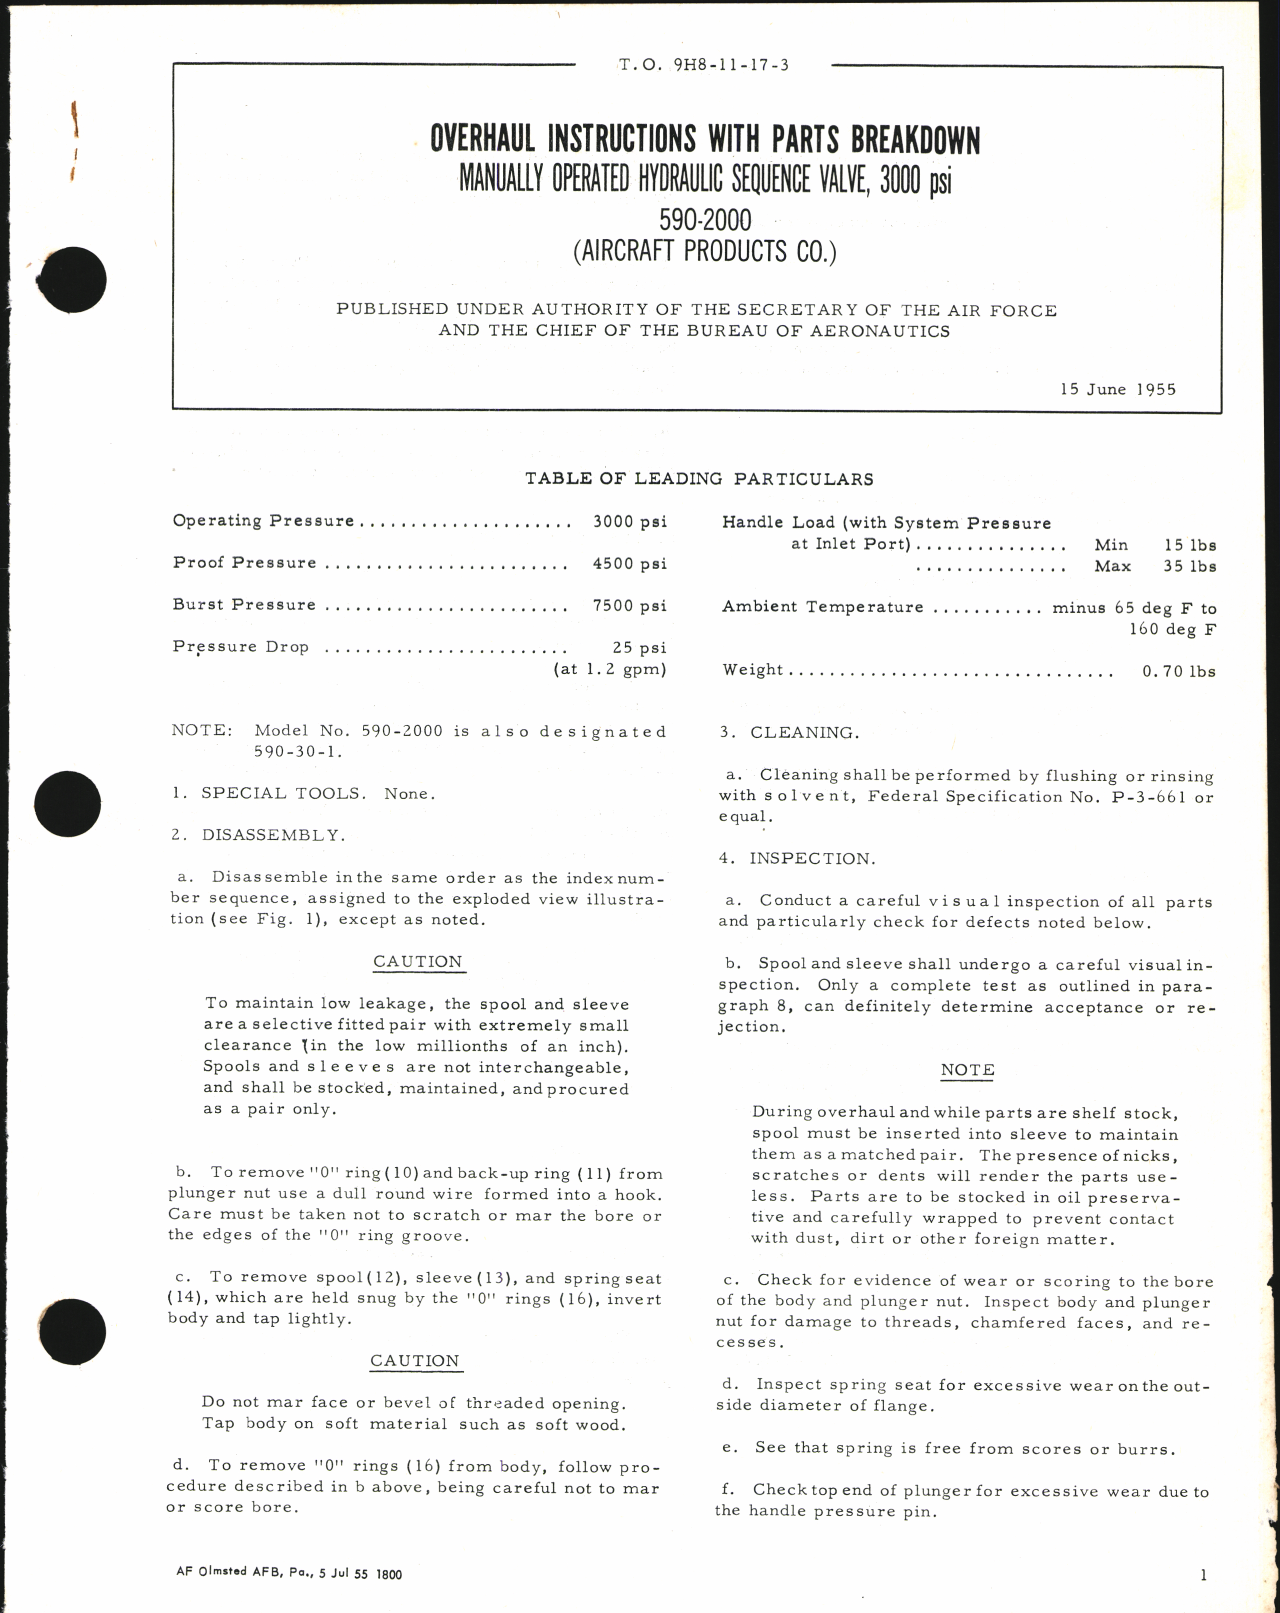 Sample page 1 from AirCorps Library document: Overhaul Instructions with Parts Breakdown for Manually Operated Hydraulic Sequence Valve, 3000 psi